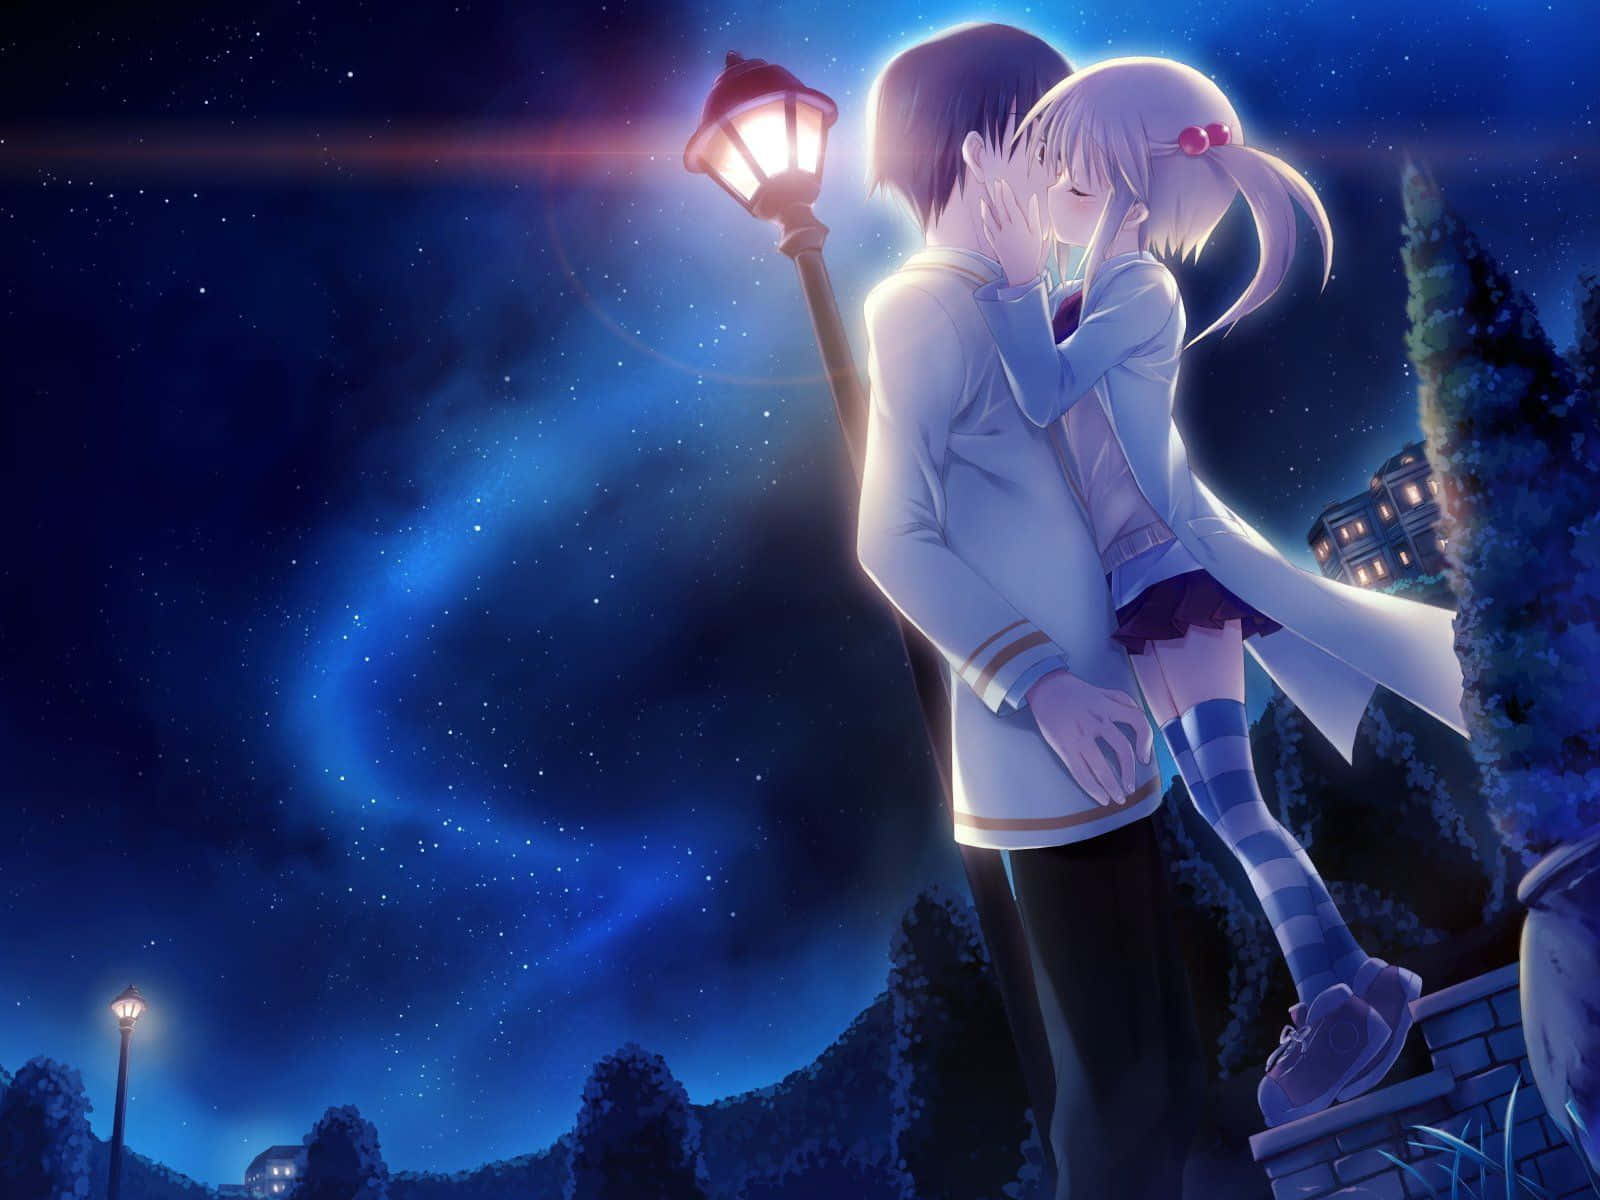 Anime couple relax in a romantic embracing embrace